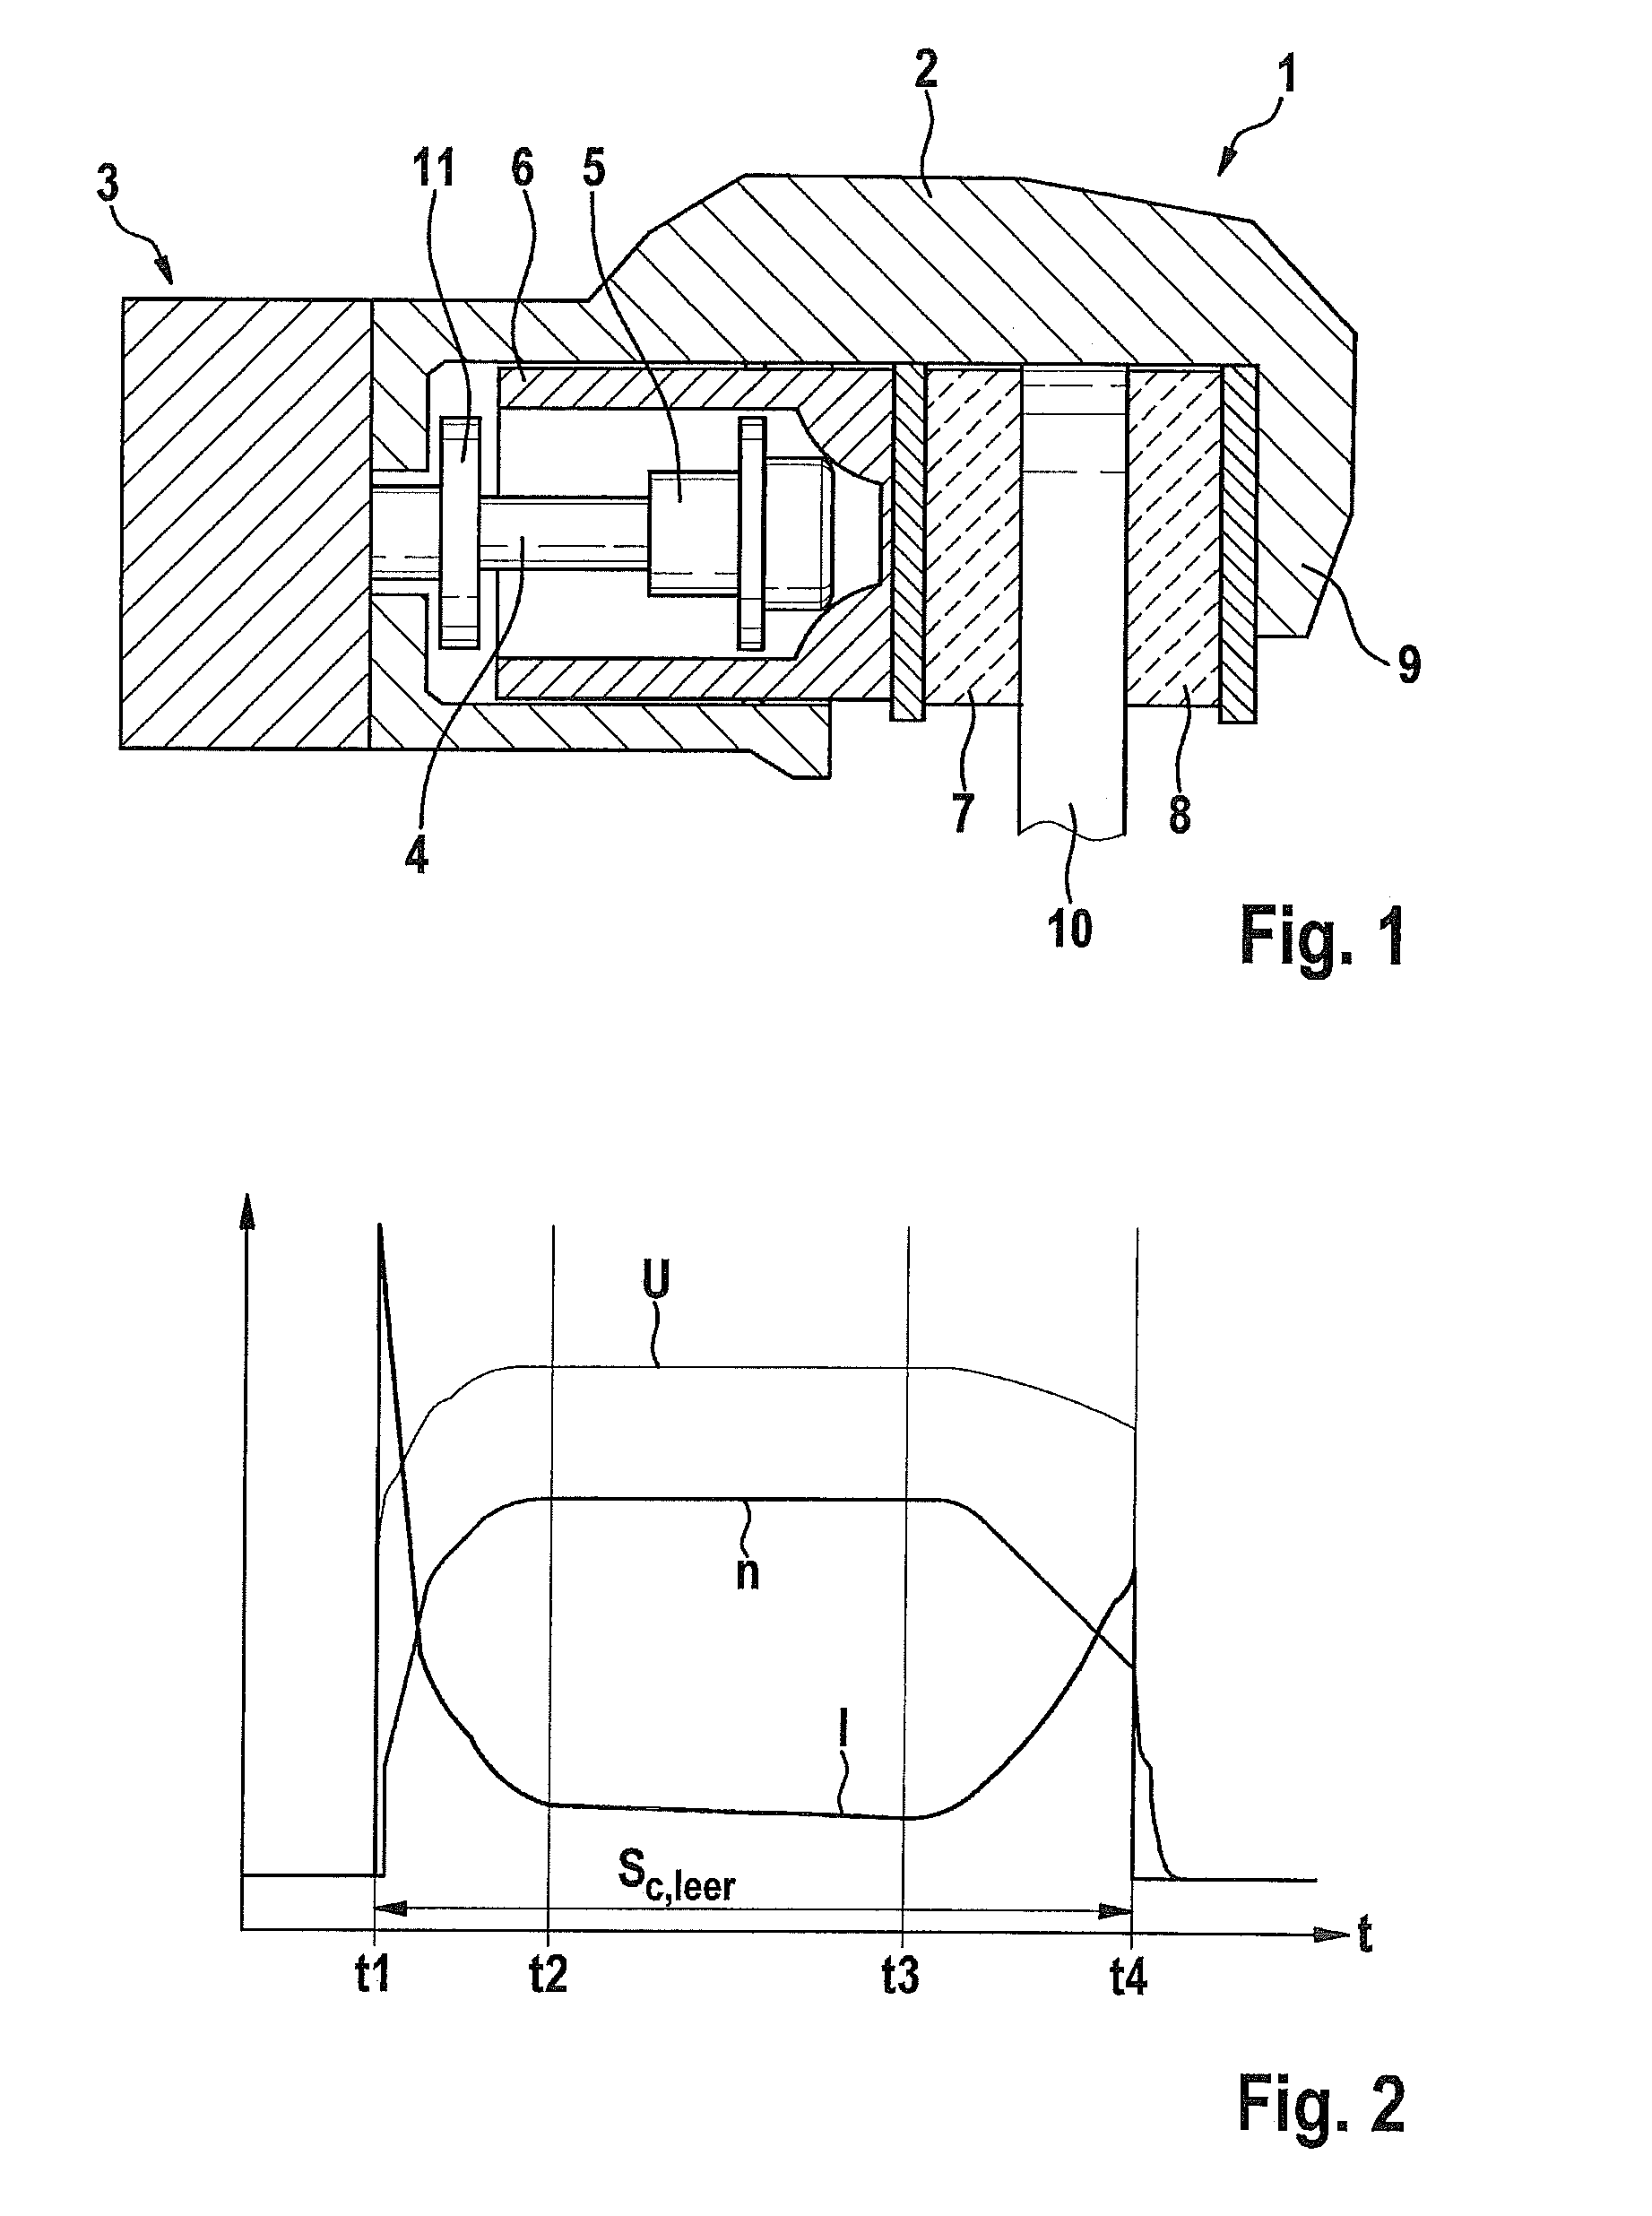 Method for setting the actuating force applied by a parking brake